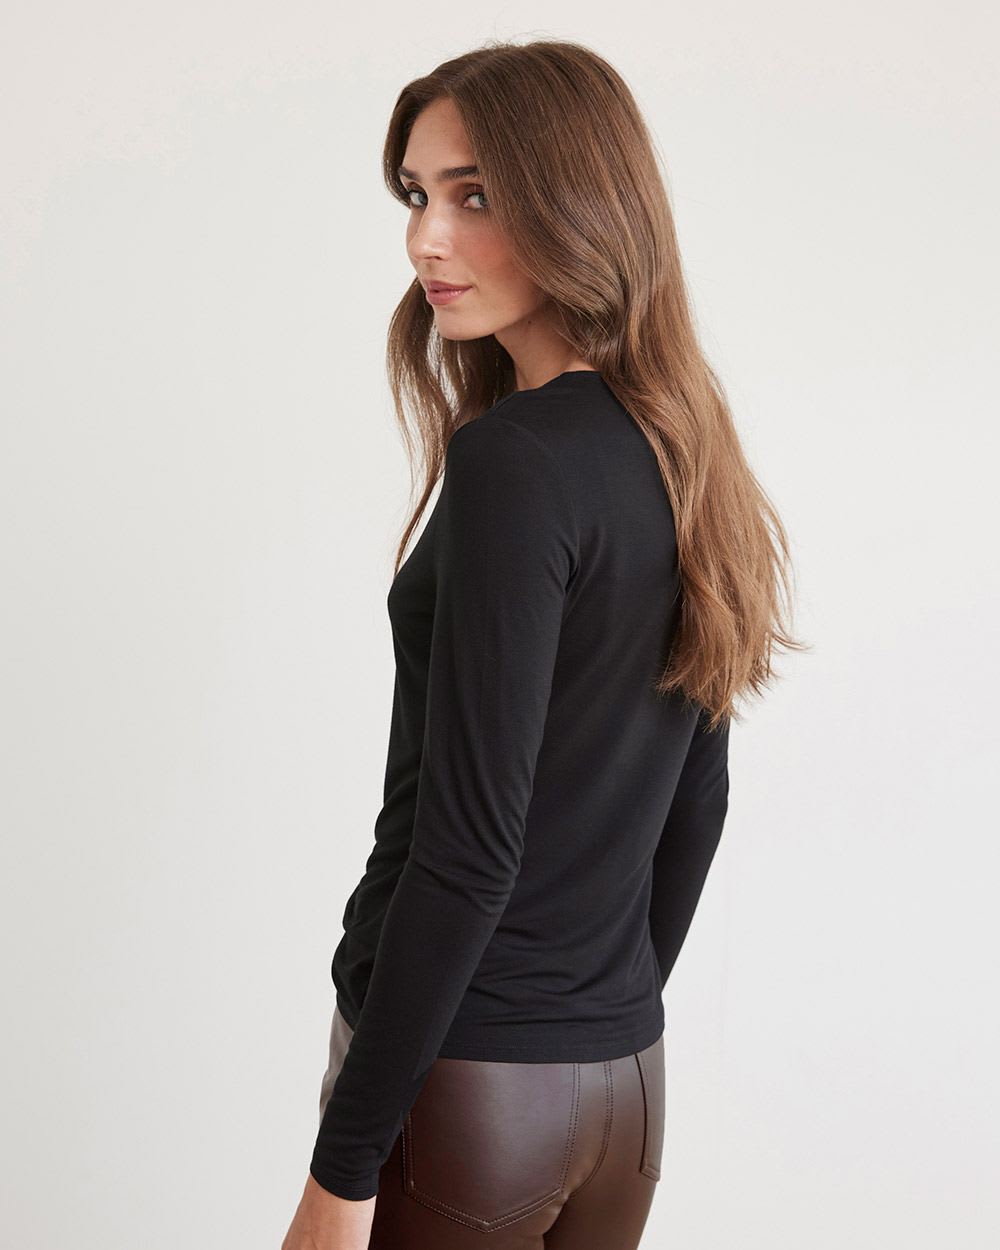 Fitted Long-Sleeve V-Neck Tee